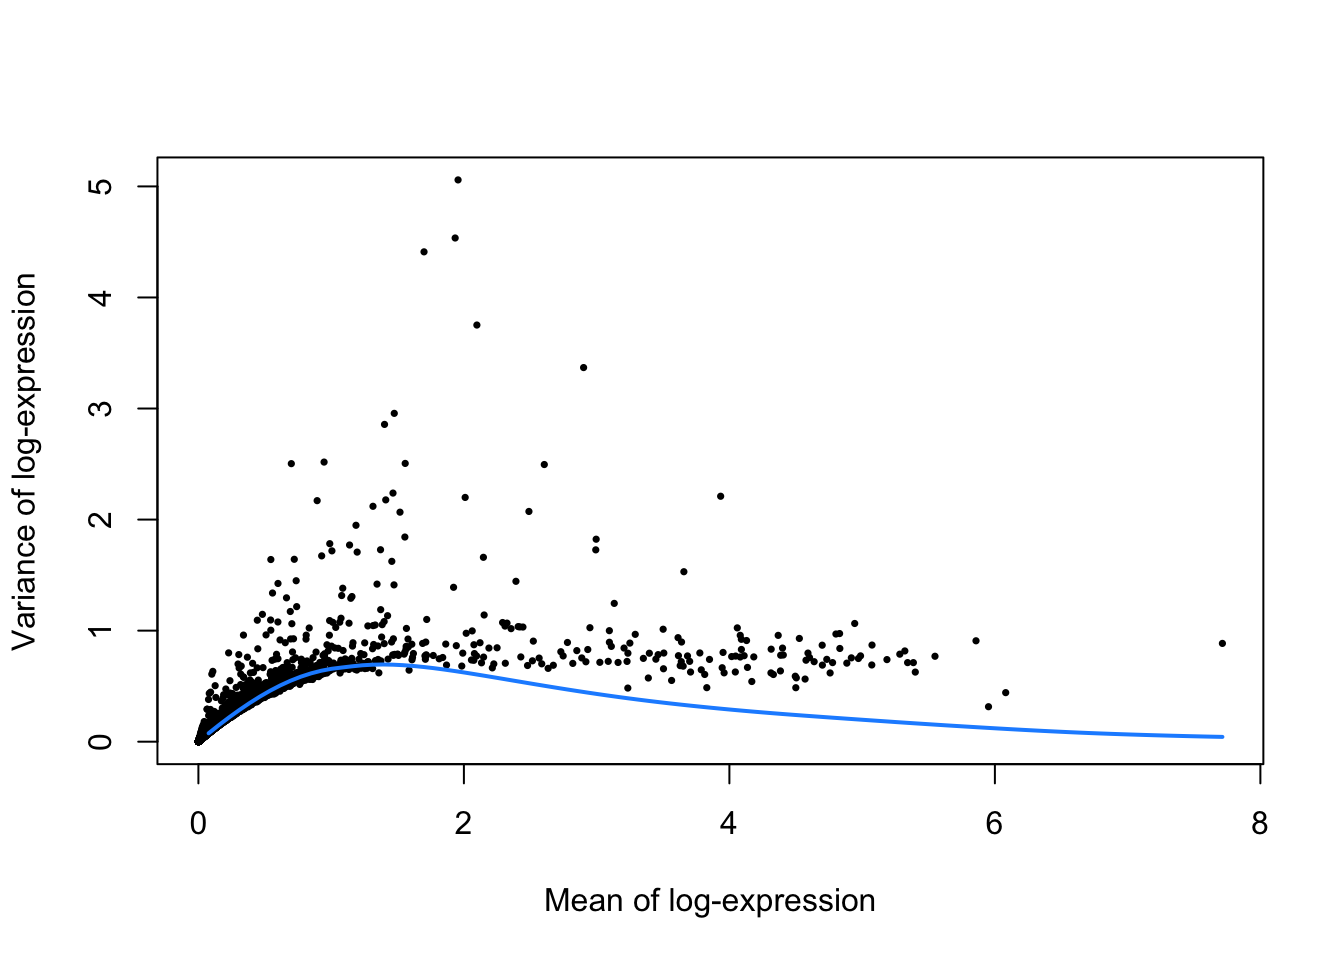 Per-gene variance as a function of the mean for the log-expression values in the PBMC dataset. Each point represents a gene (black) with the mean-variance trend (blue) fitted to simulated Poisson counts.